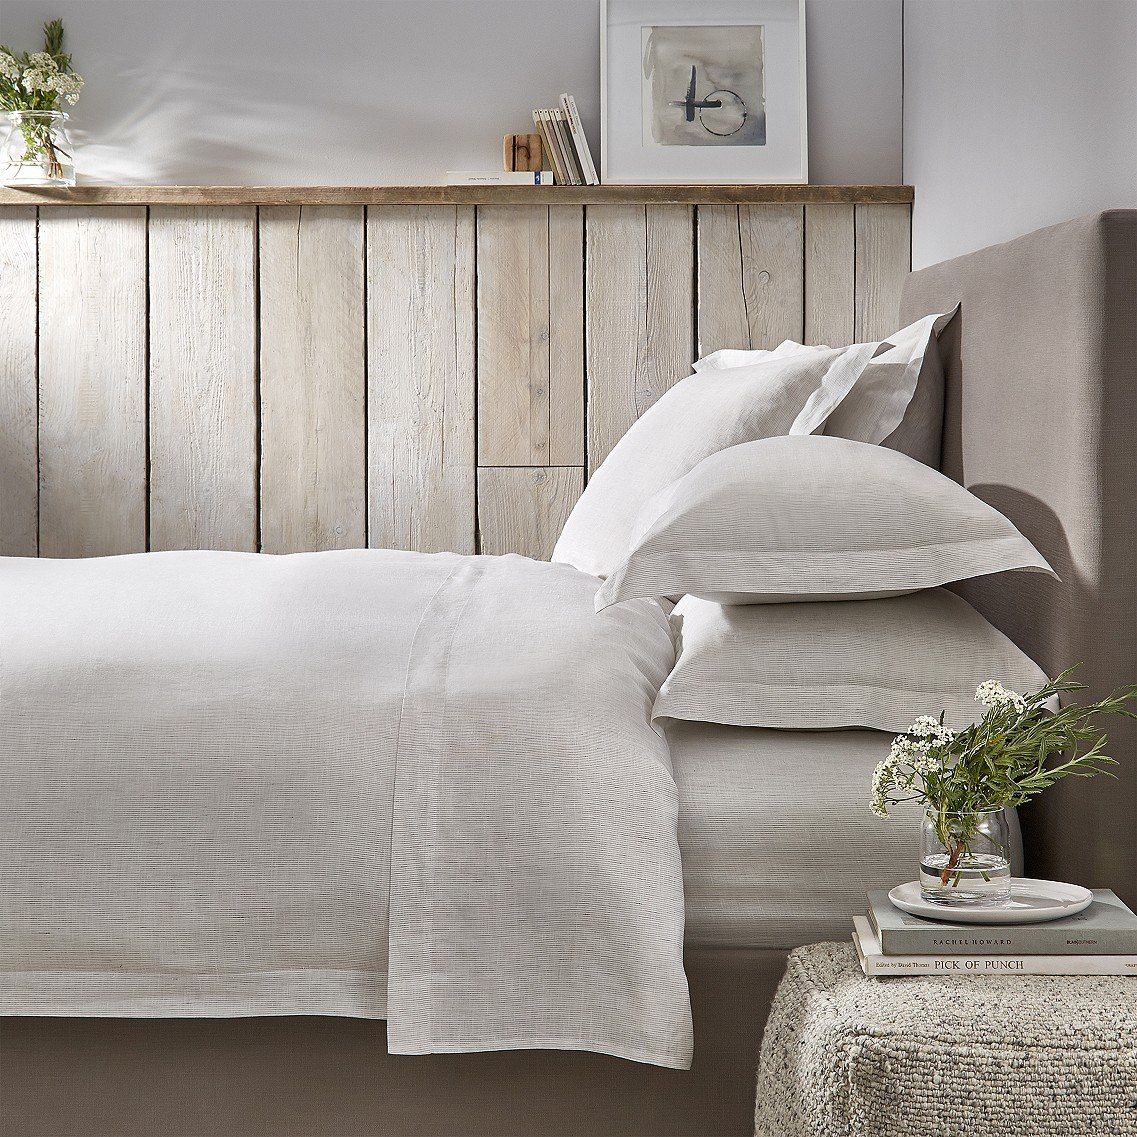 6 Brilliant Silk Bedding Pieces To Buy For Beds - Silk Bed Sheets